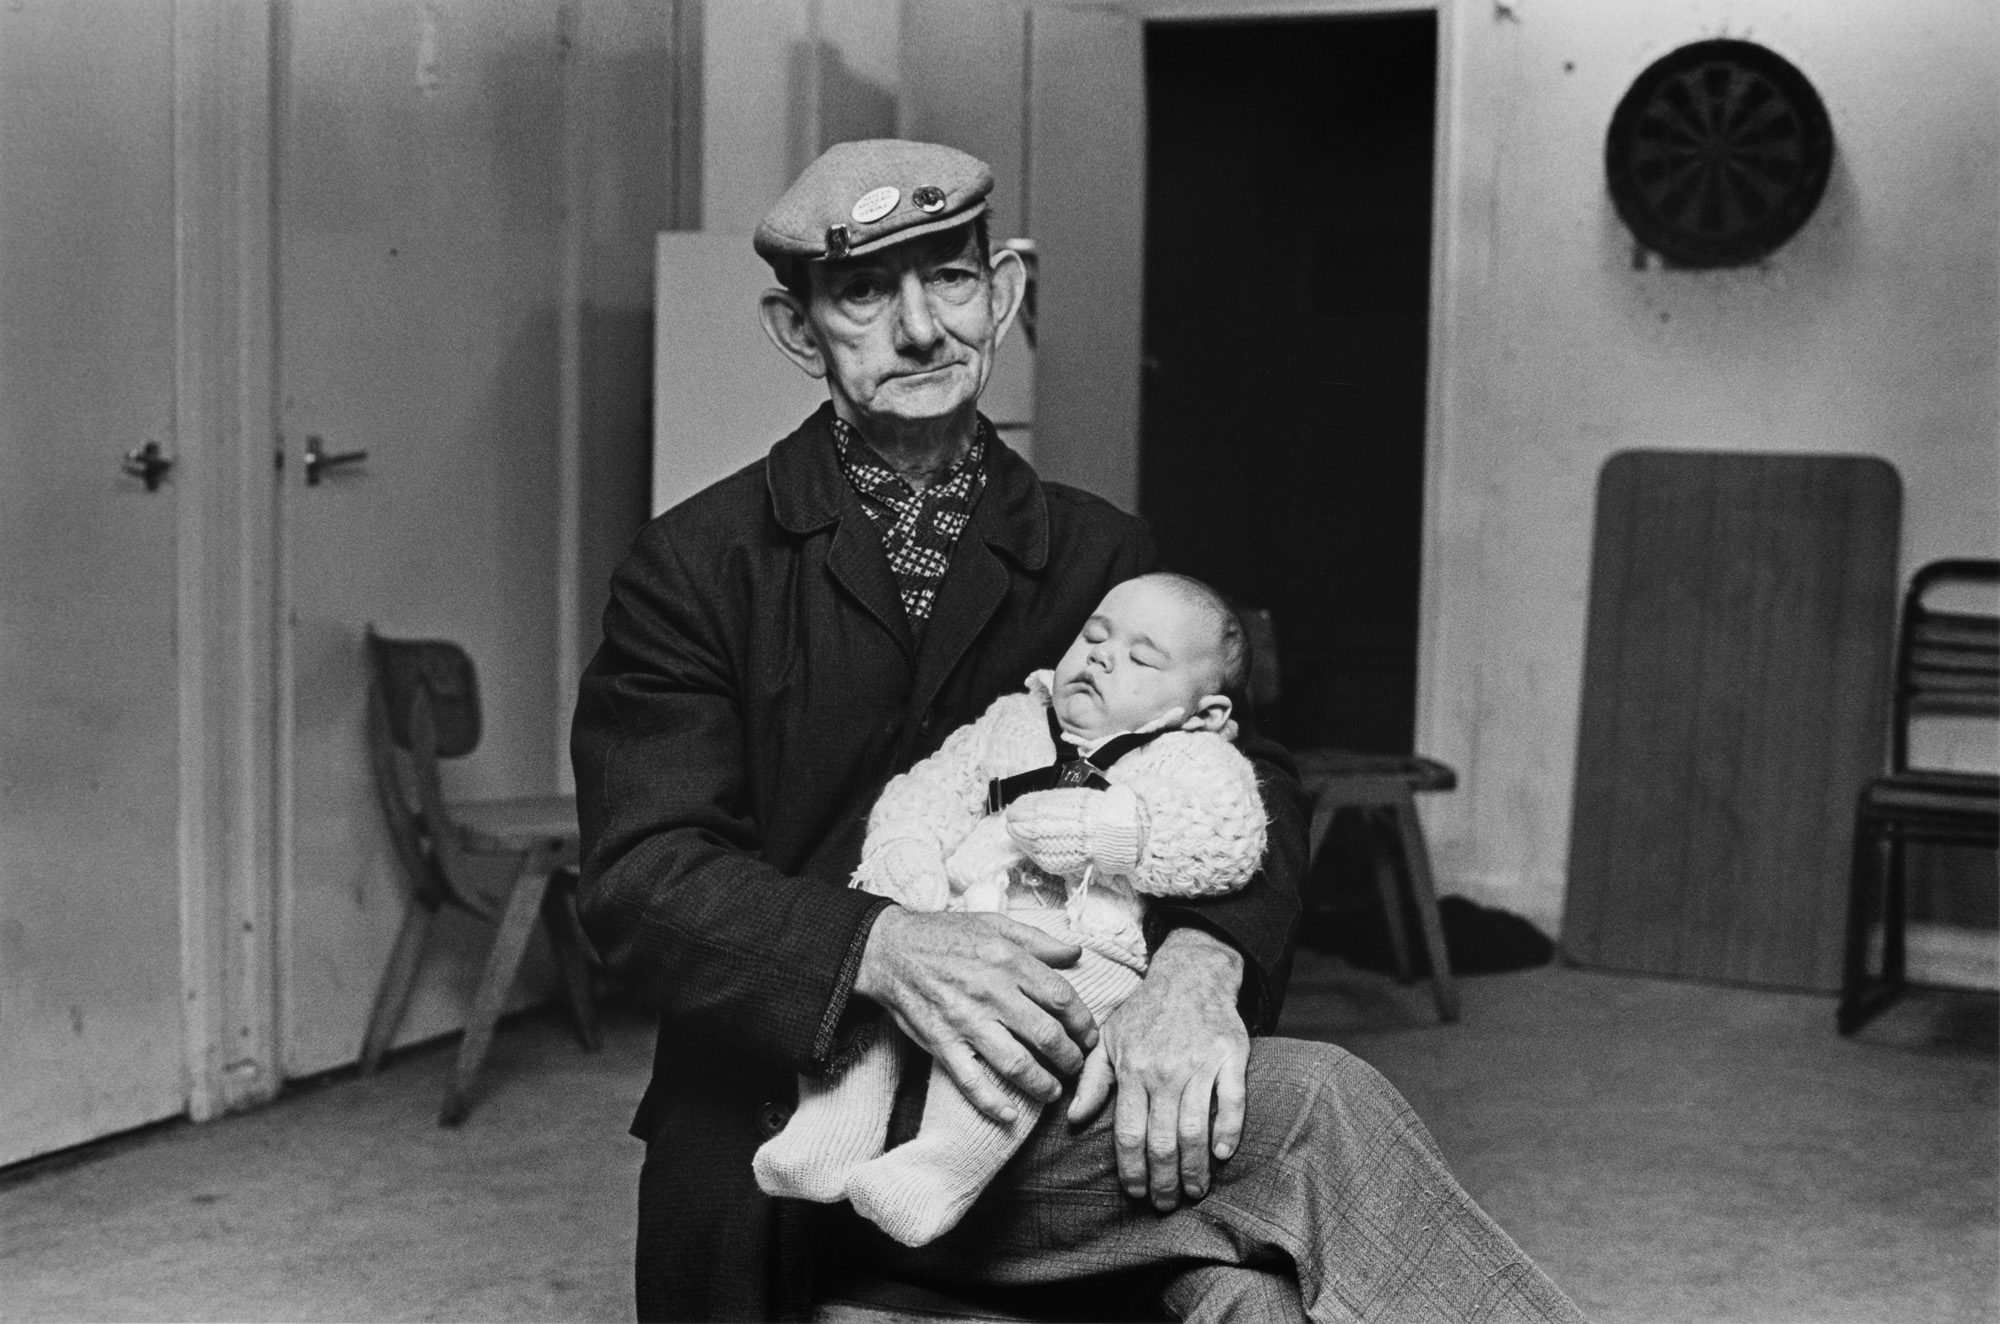 Black and white photograph of a retired pit deputy wearing a hat and dark coat holding a three-month-old baby sleeping on his lap